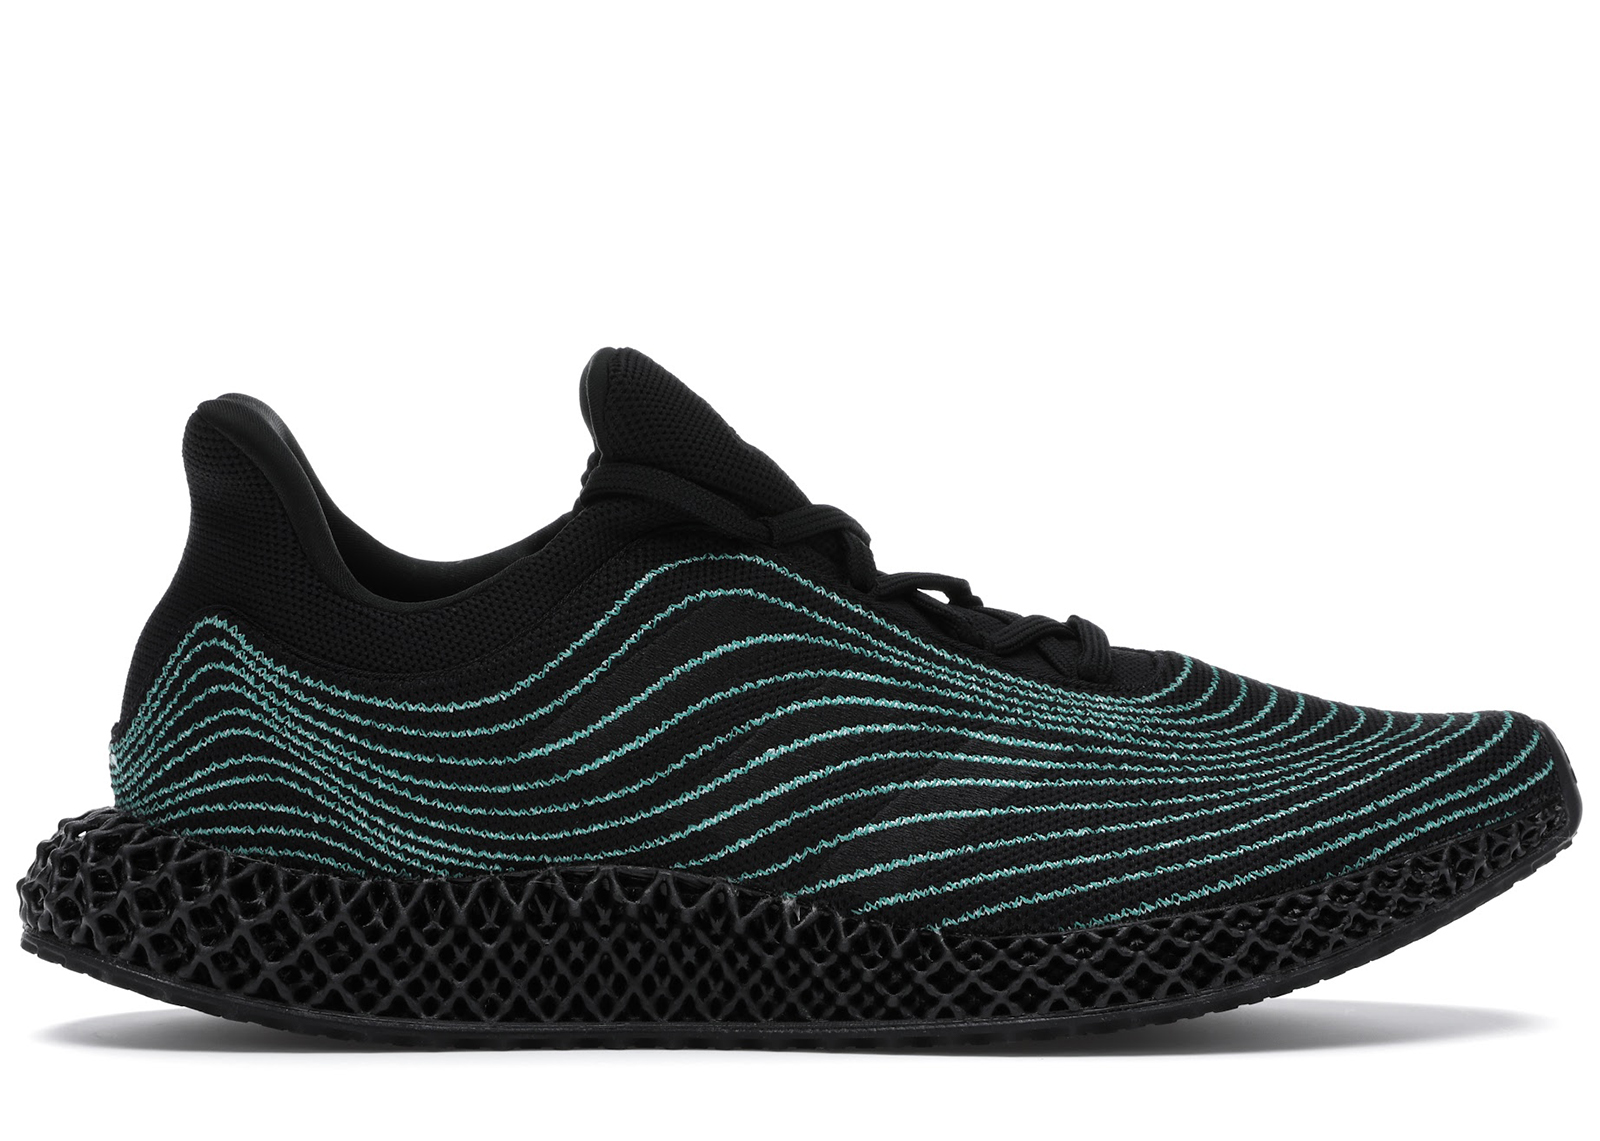 adidas Ultra Boost 4D Uncaged Parley 